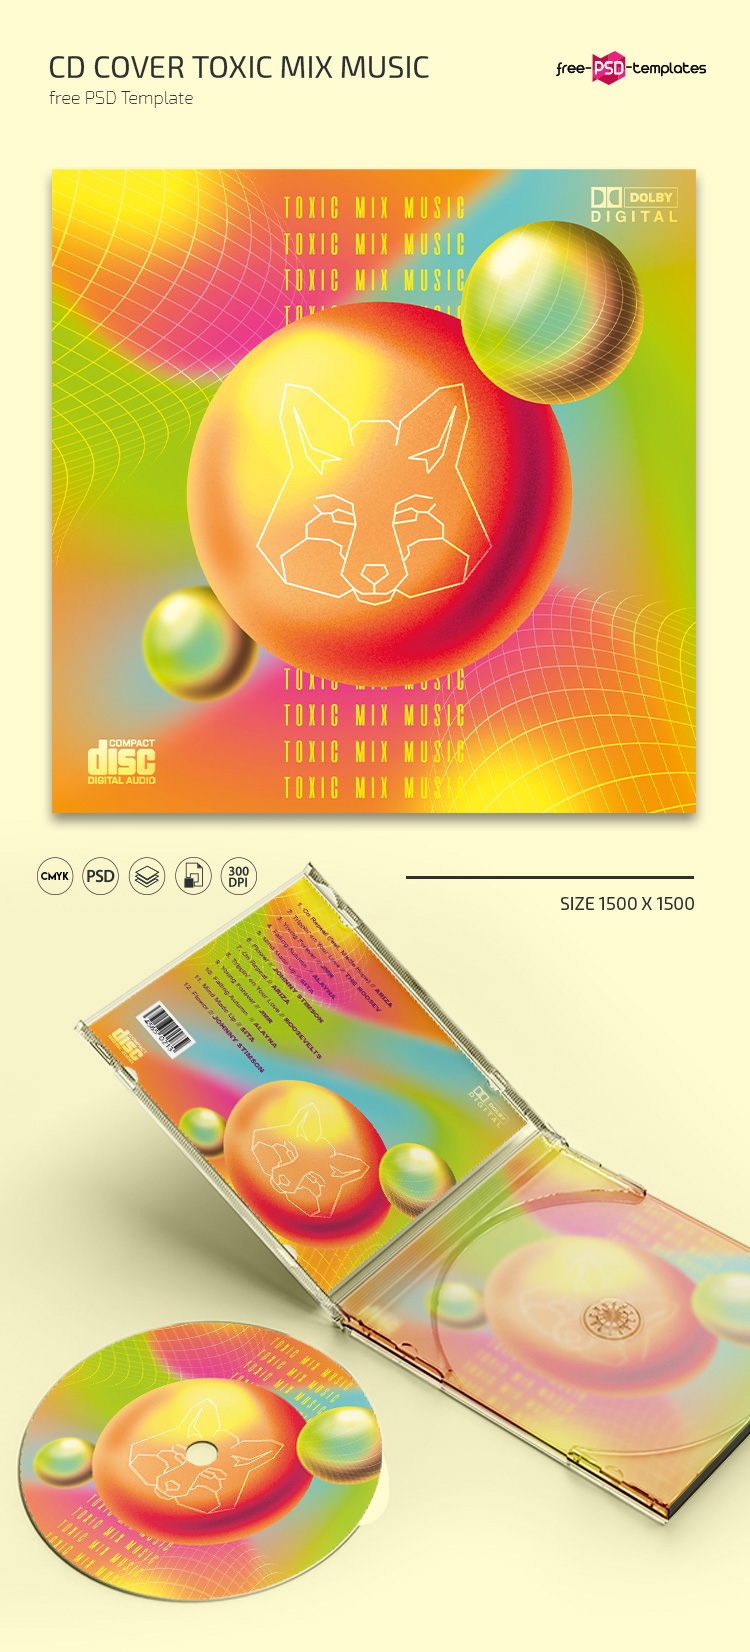 seksuel træt af kant Free CD Cover Toxic Mix Music PSD Template – Free PSD Templates